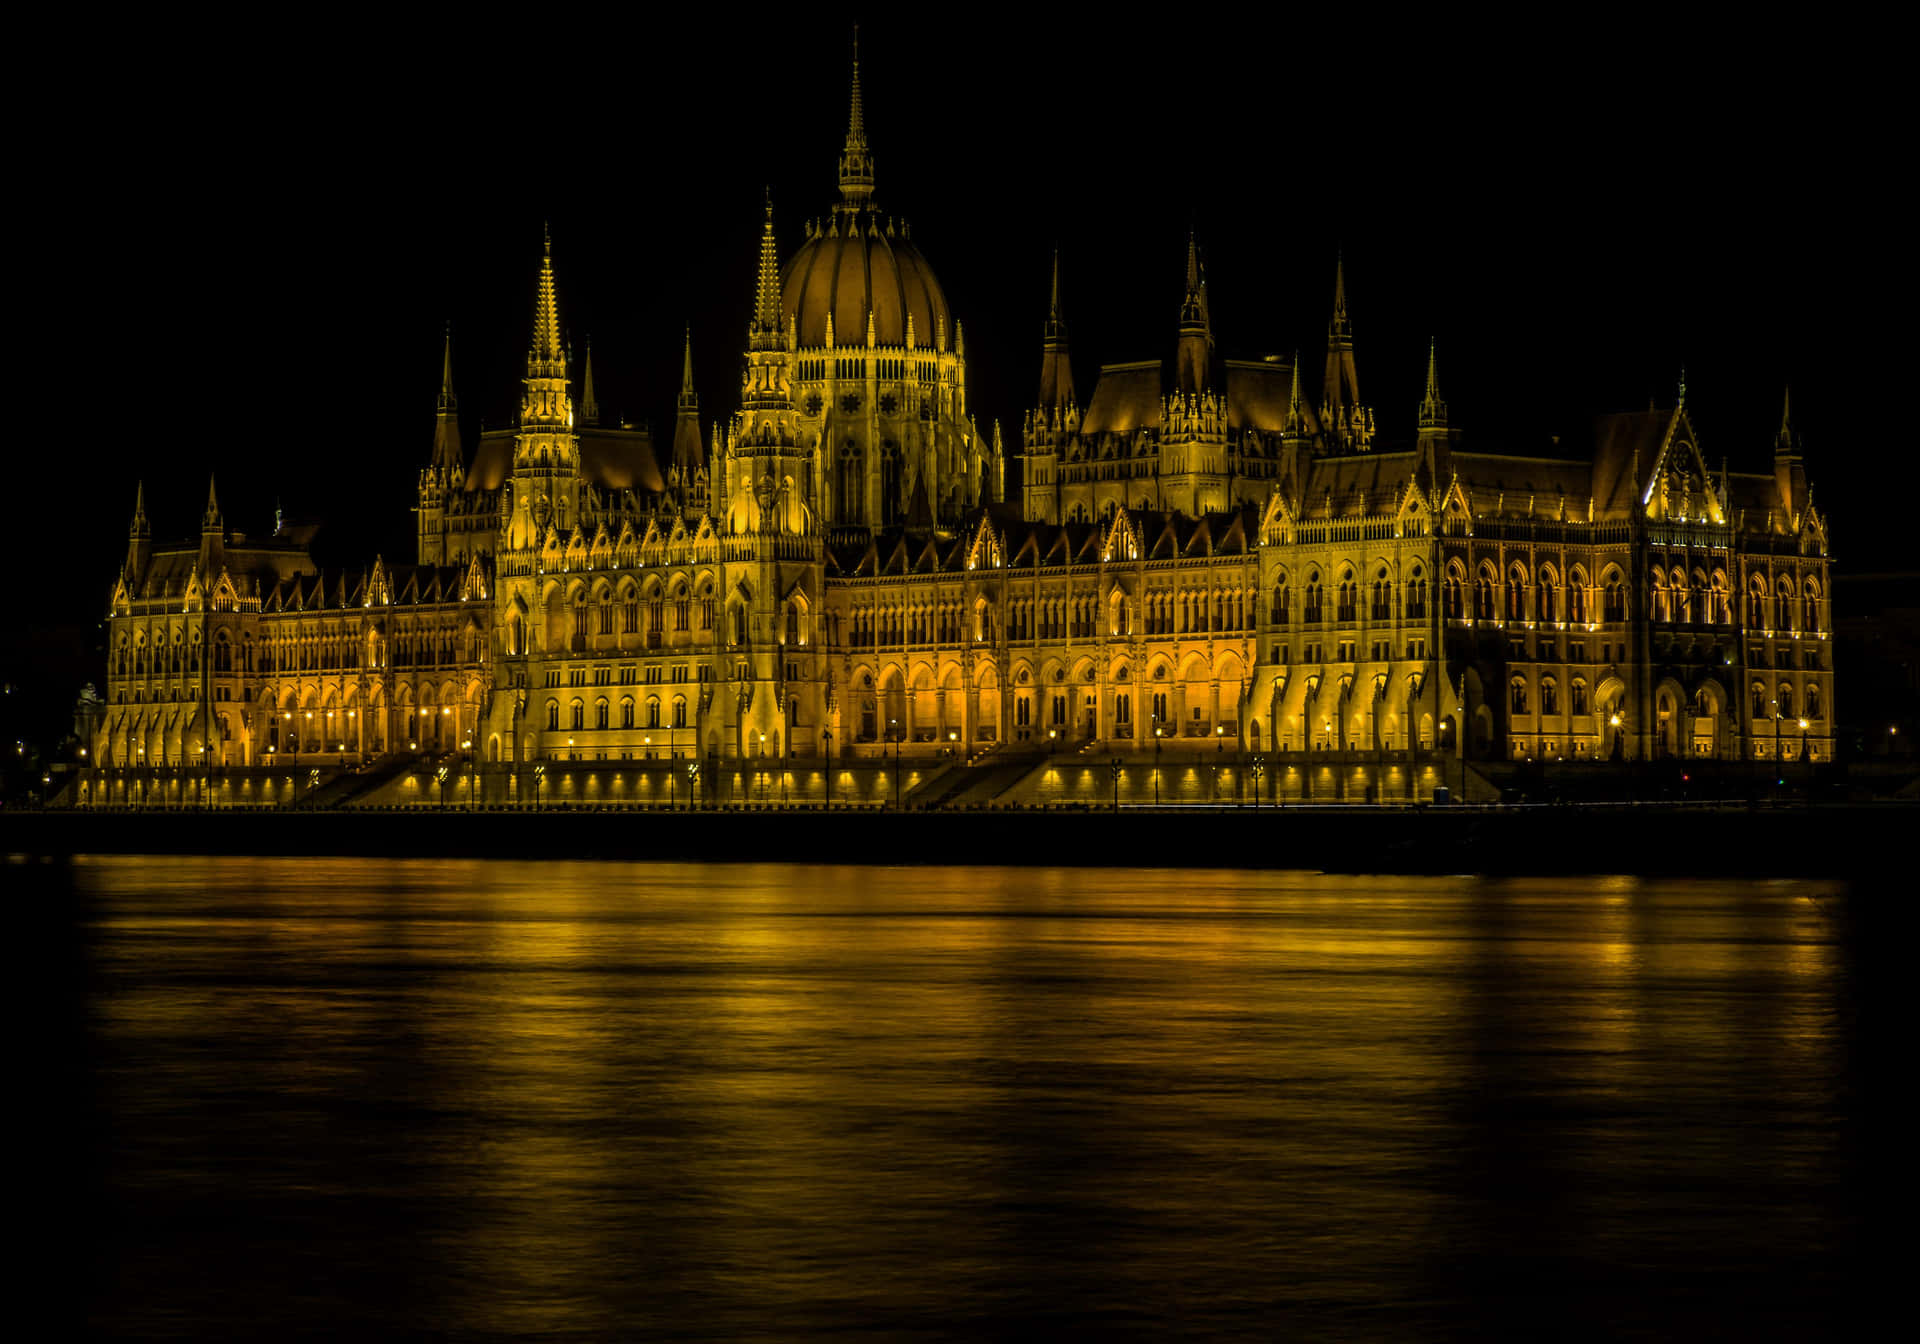 Illuminated at night, the Hungarian Parliament Buildings are a sight to behold Wallpaper